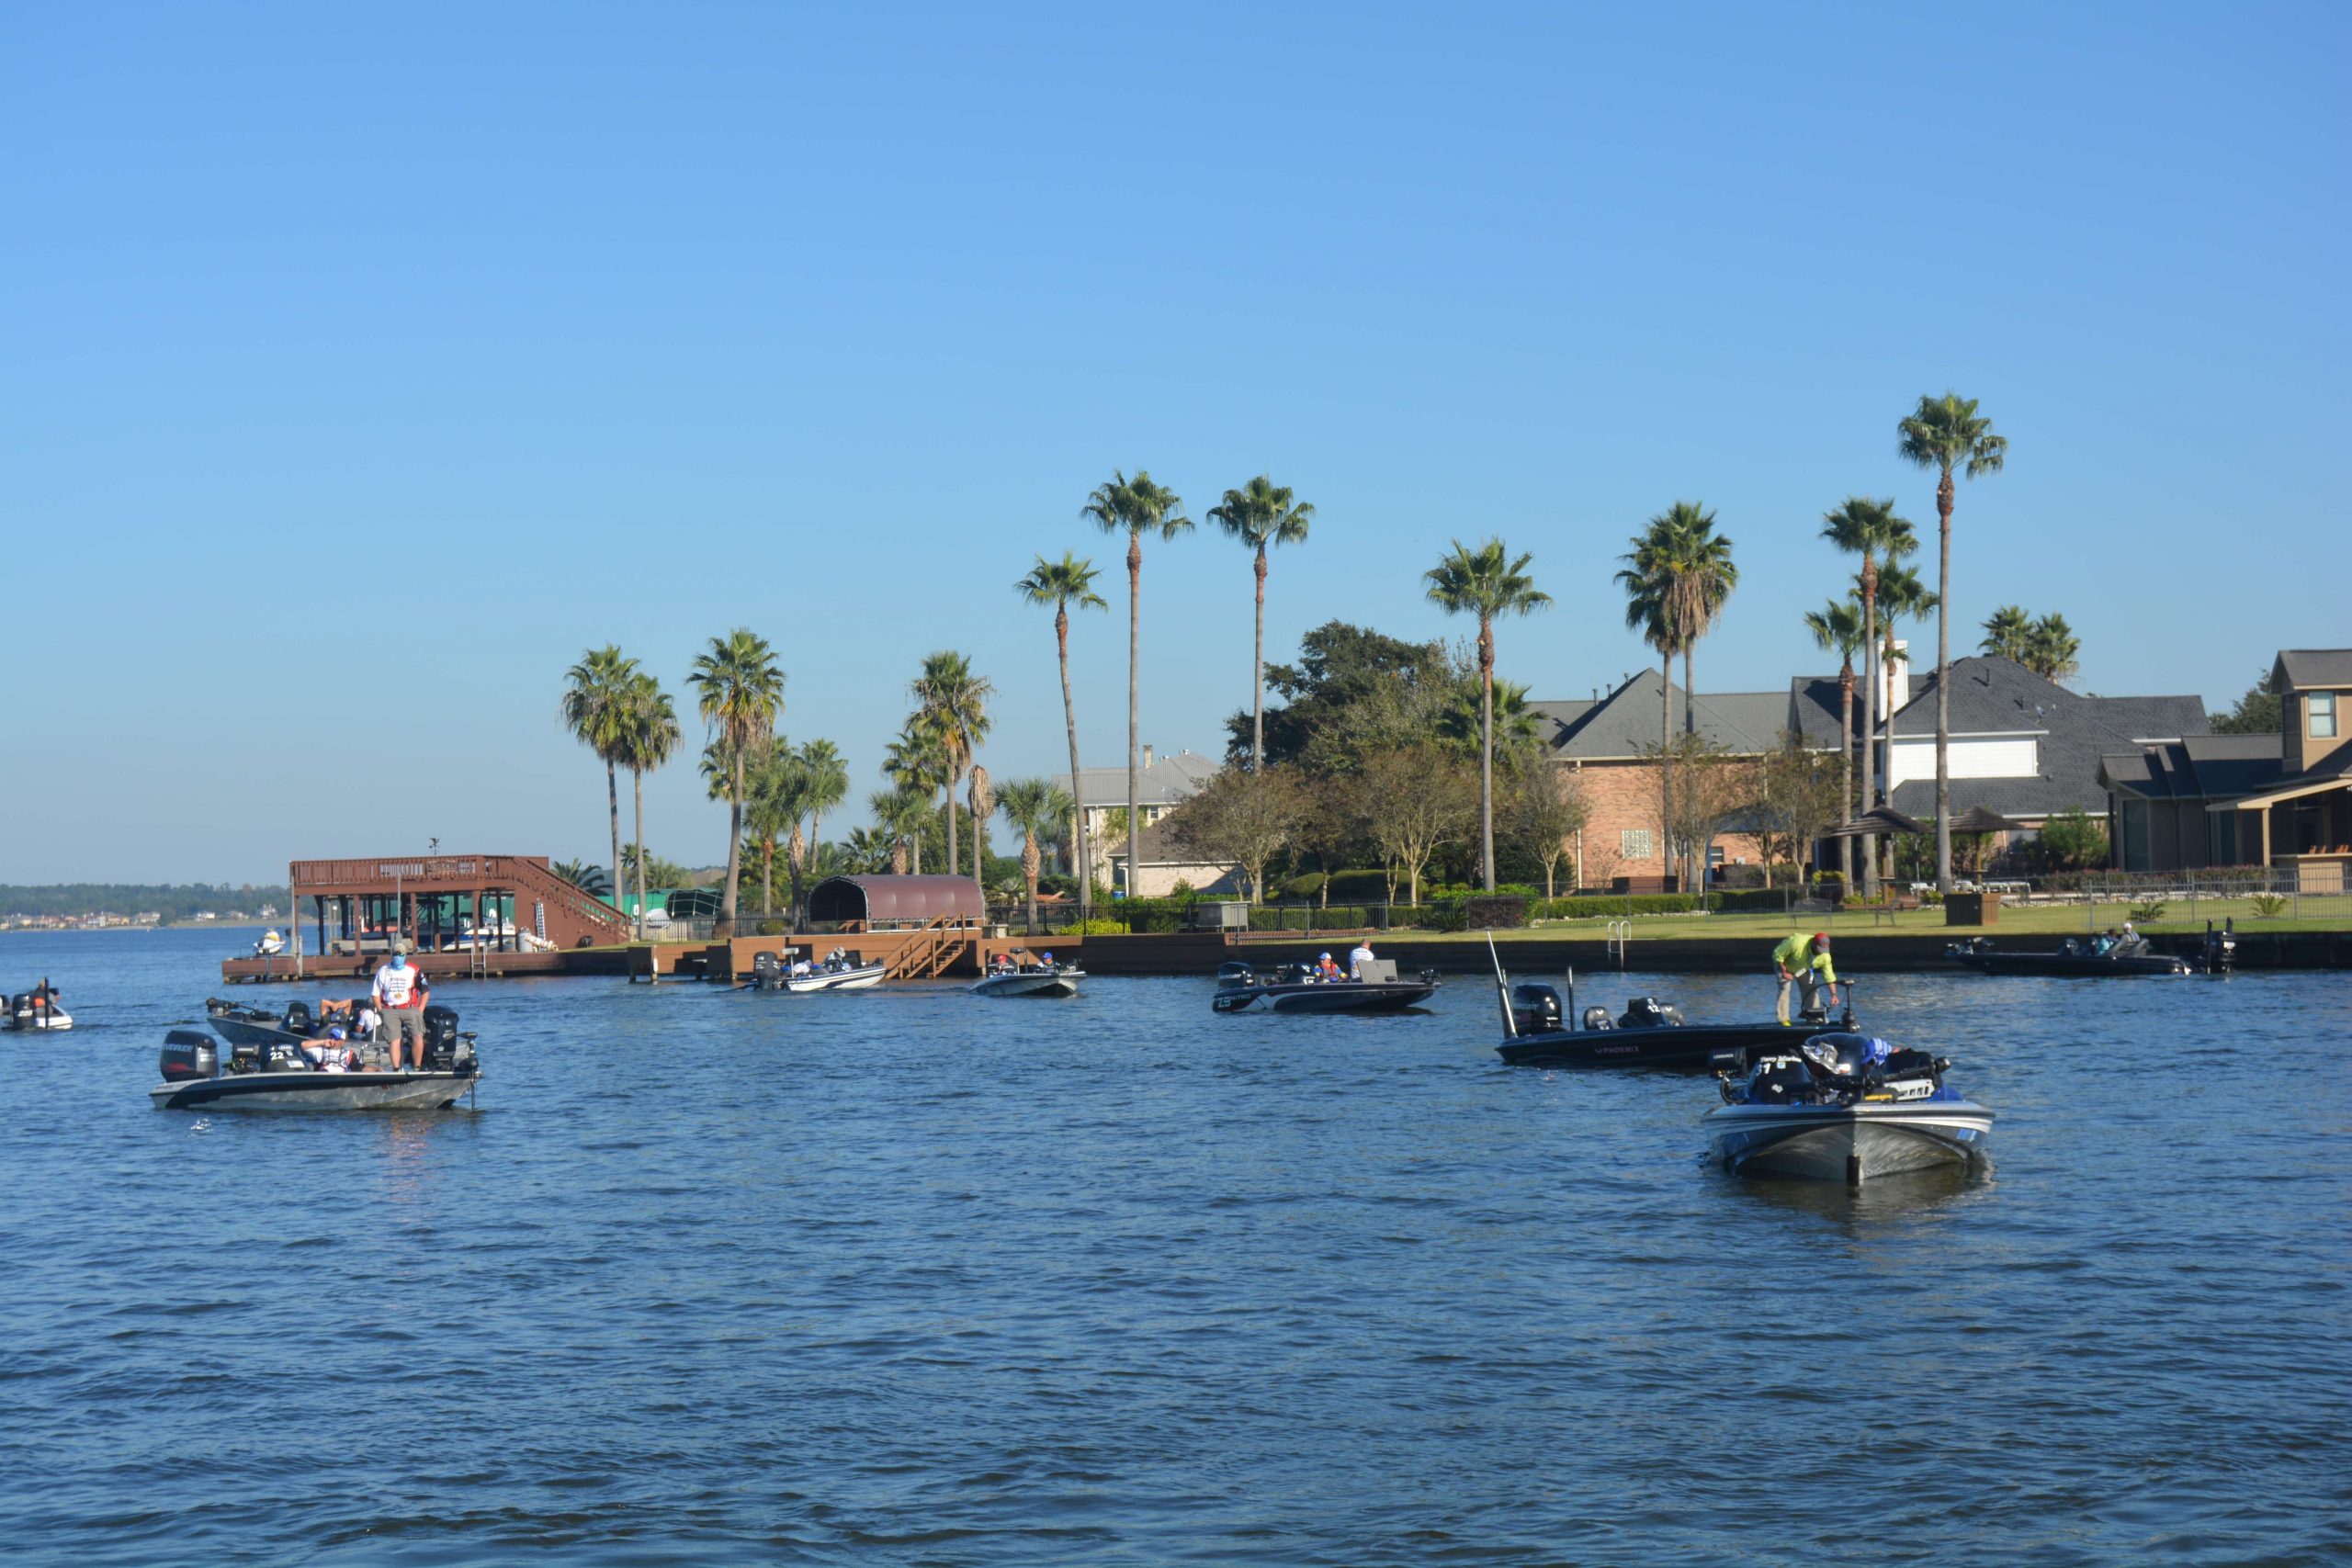 Competitors are coming into Lakeview Marina in Conroe, Texas, where they will weigh in each day, beginning Thursday.